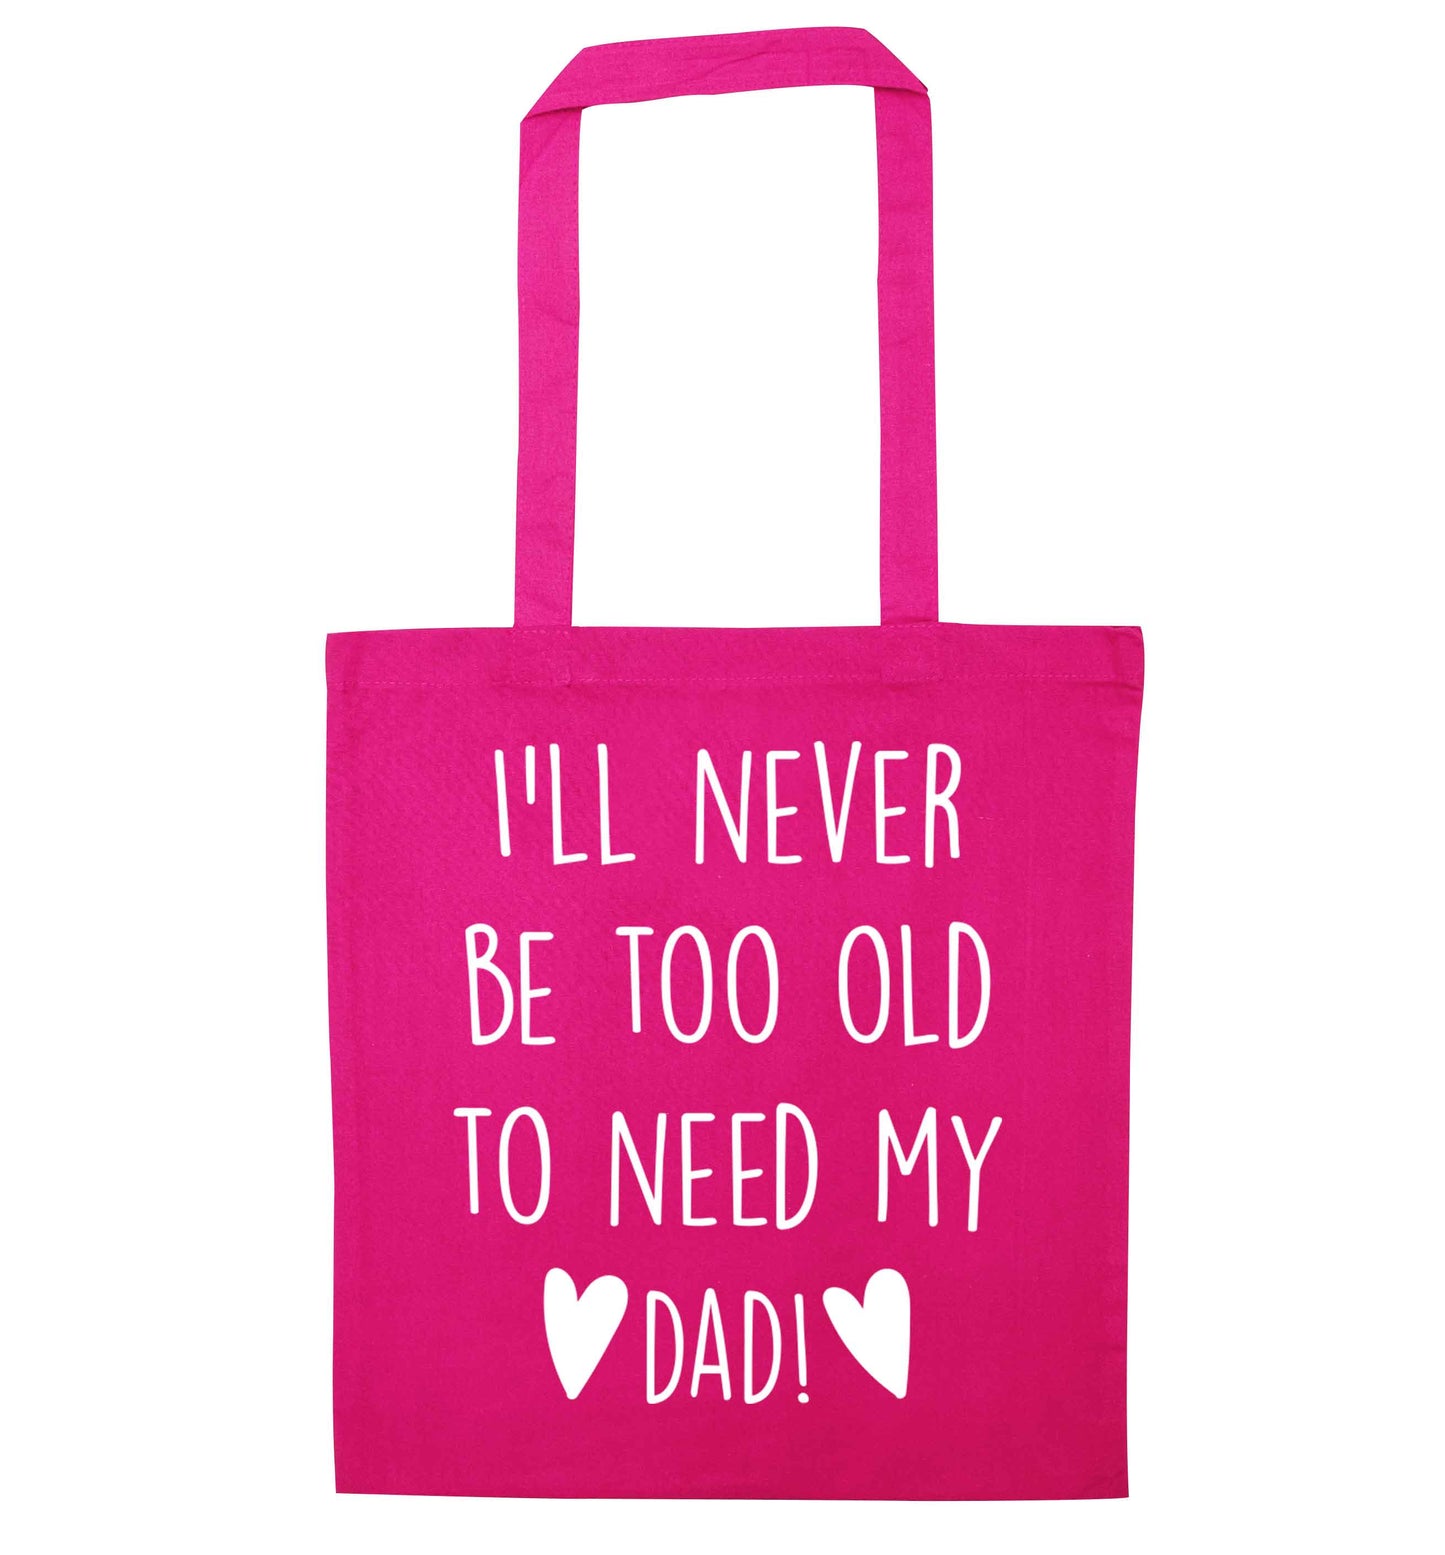 I'll never be too old to need my dad pink tote bag